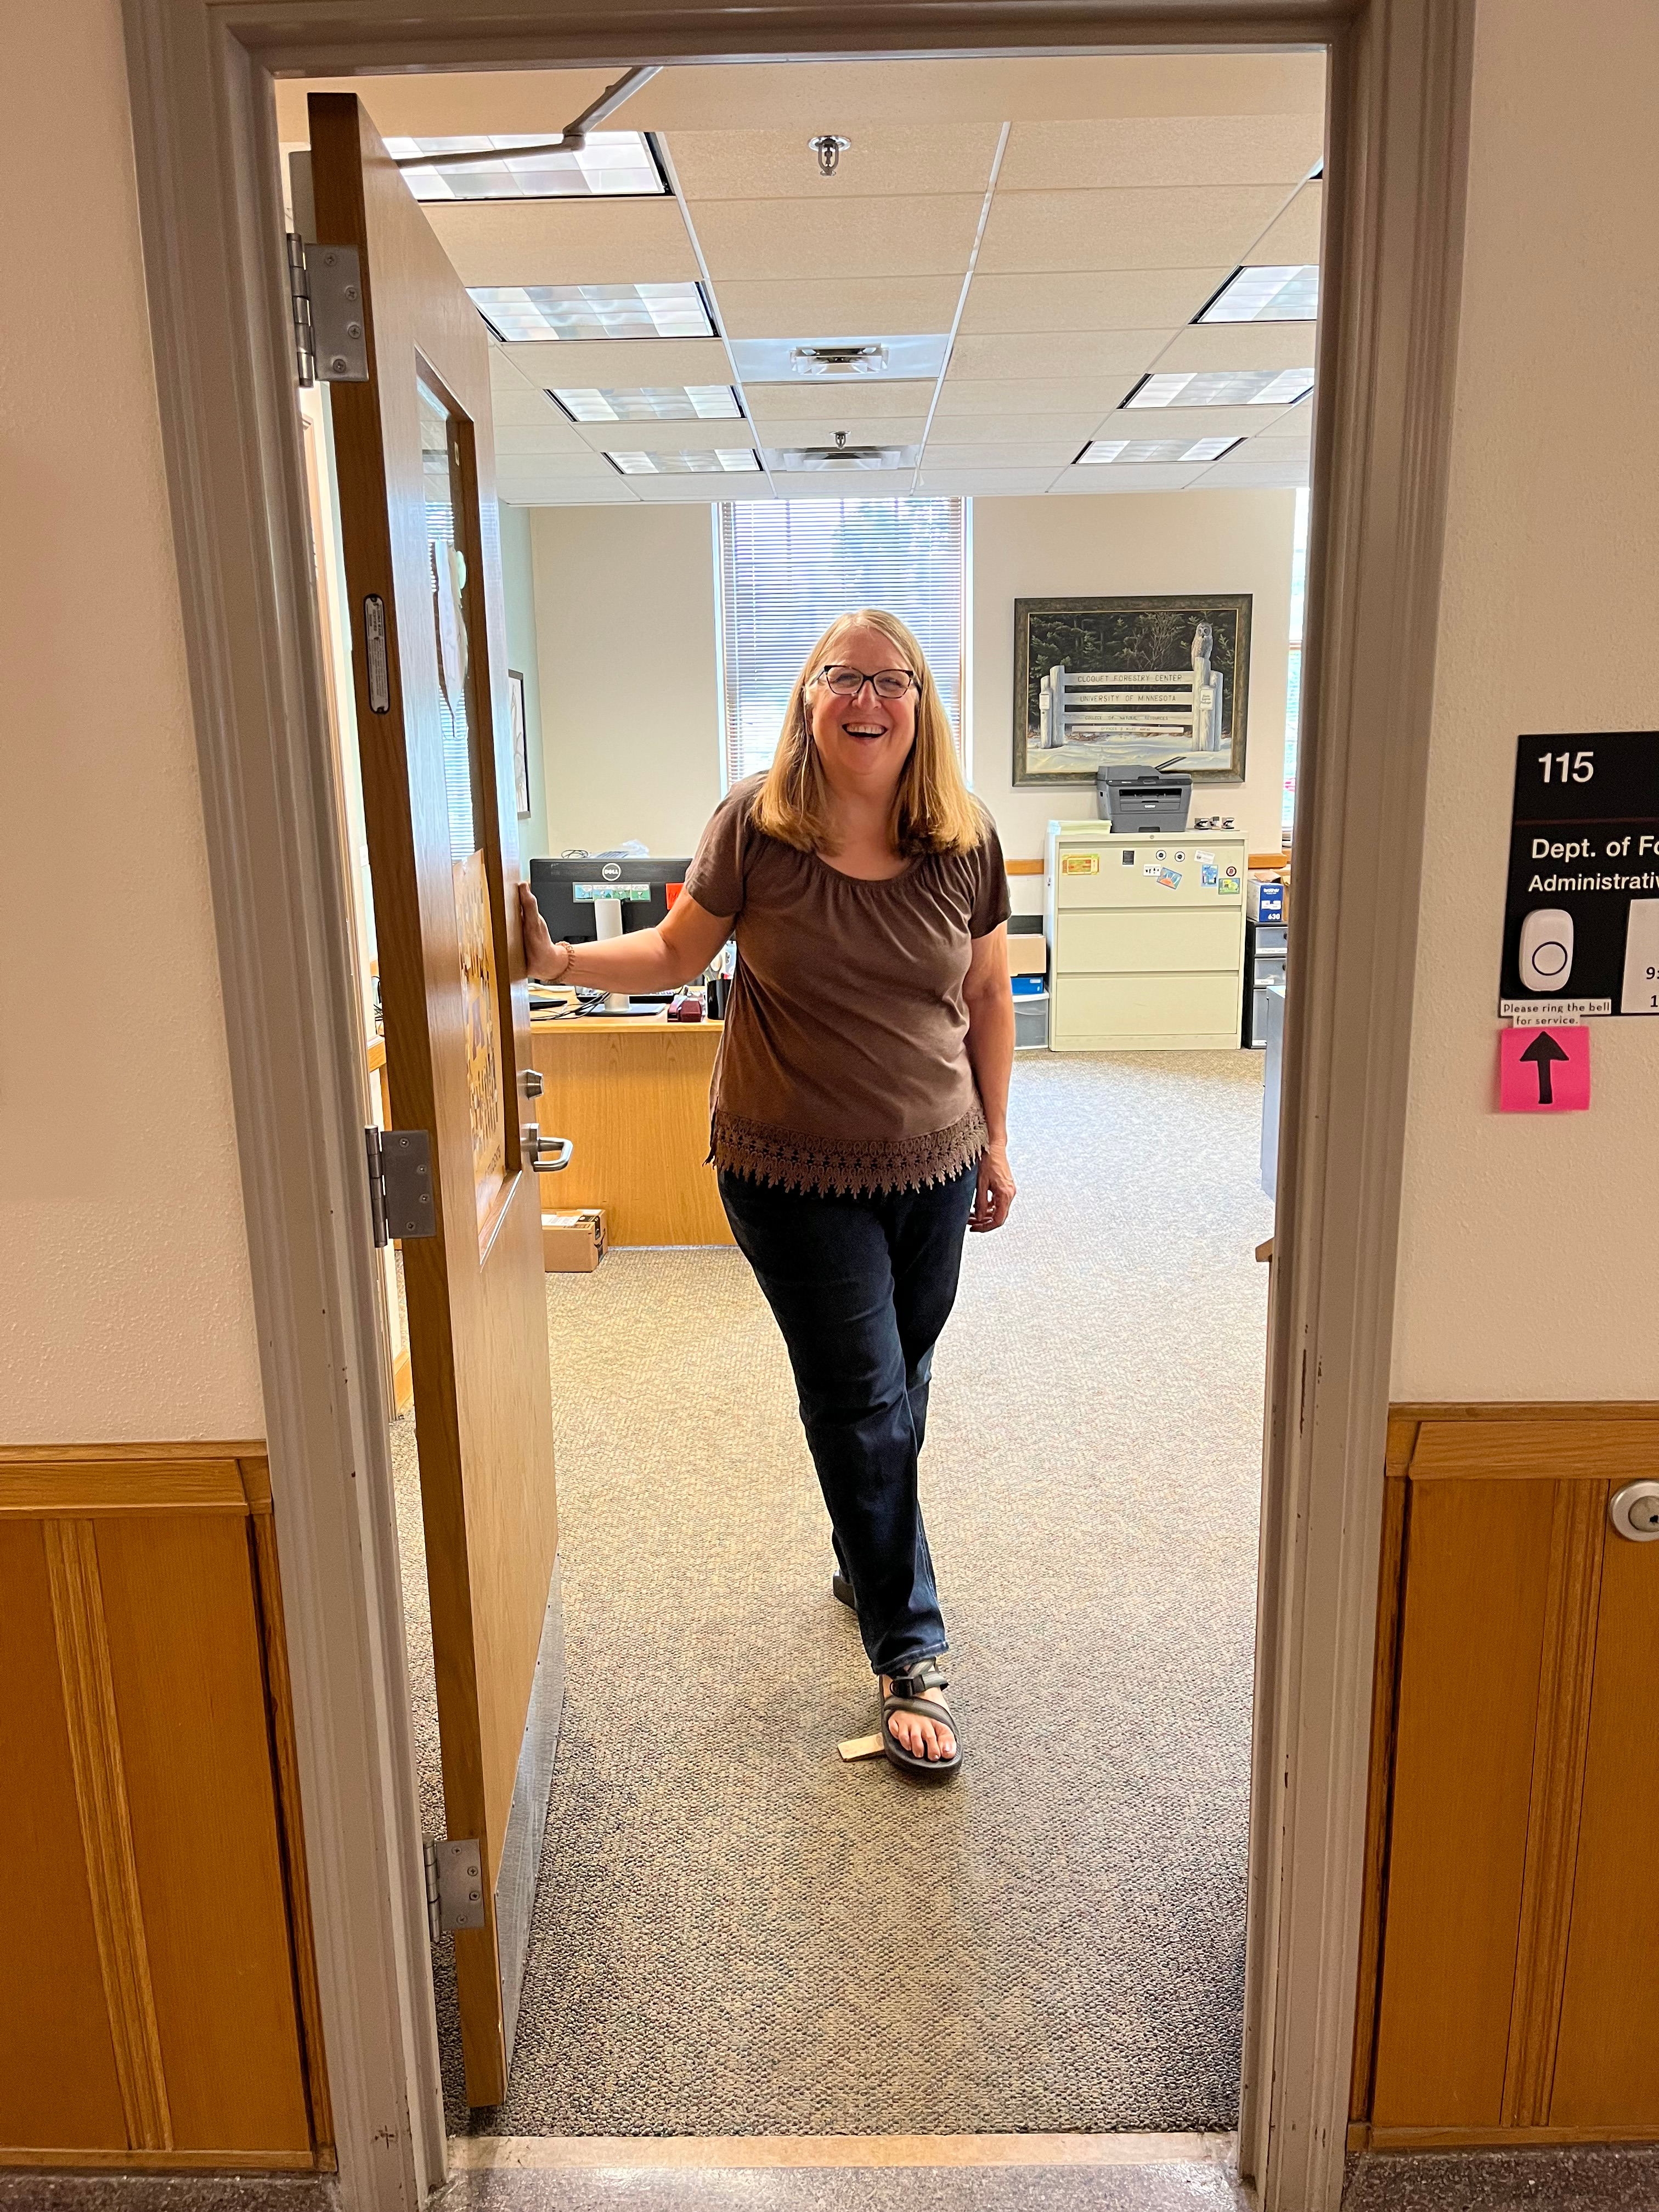 A woman with straight, shoulder-length blond hair and black-rimmed glasses stands smiling in an office doorway as she opens the door. She's wearing jeans and a brown short-sleeved top with brown lace decorating the hem.